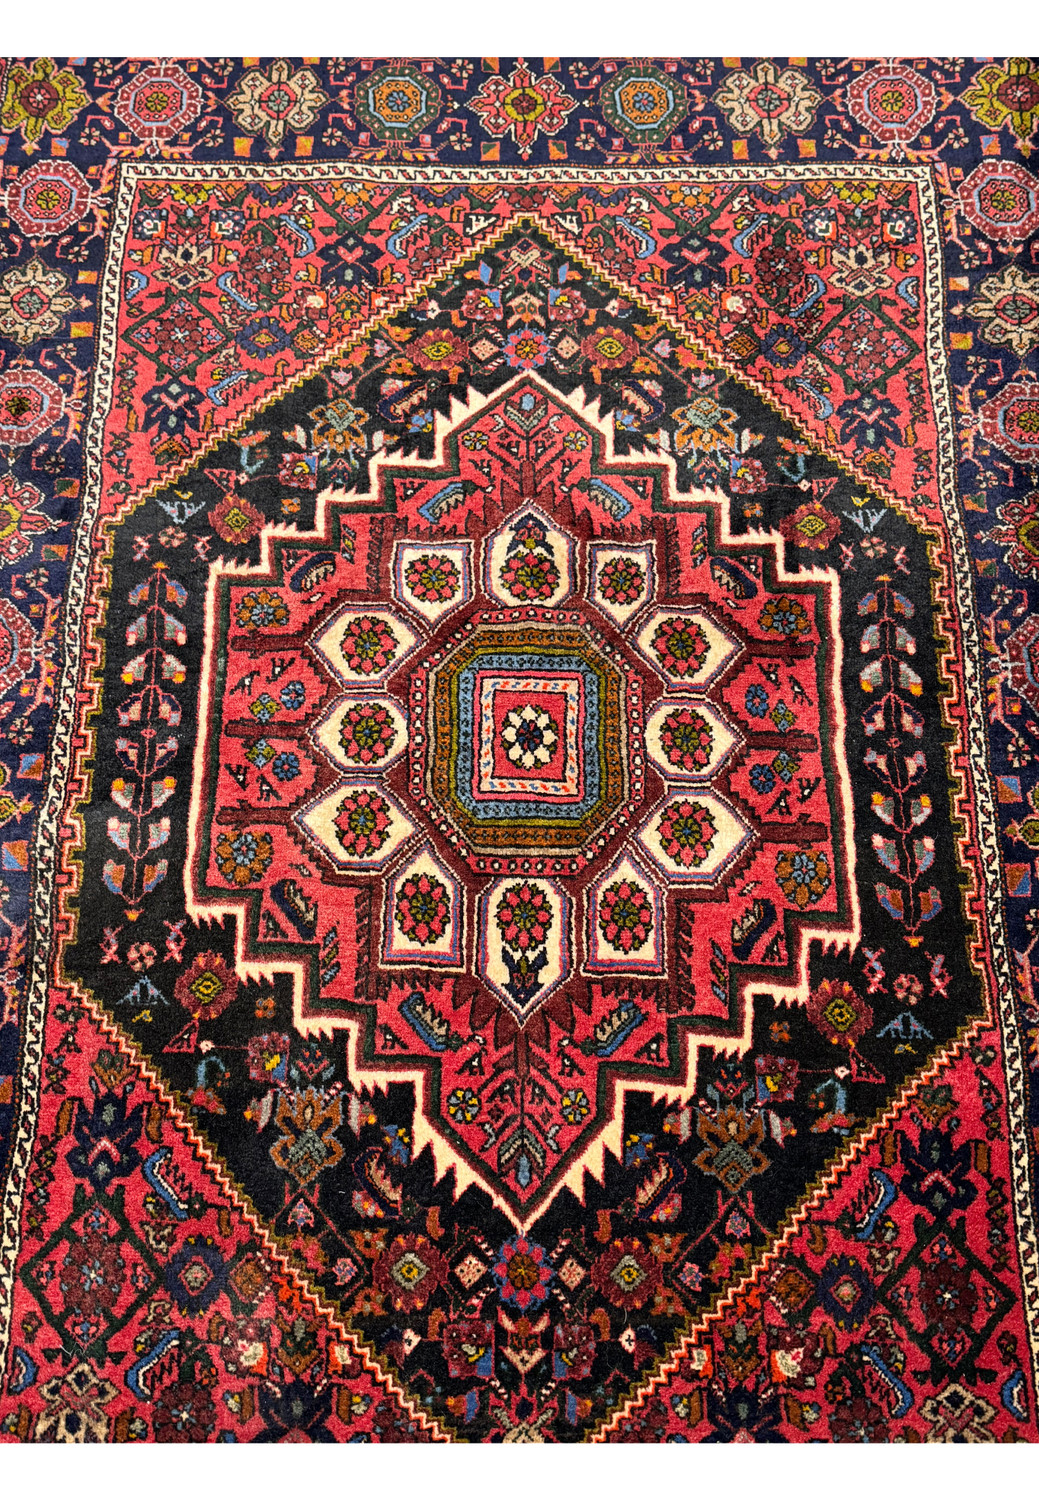 Full view of a Persian Gholtogh rug on the floor, showcasing the complex design and traditional motifs.